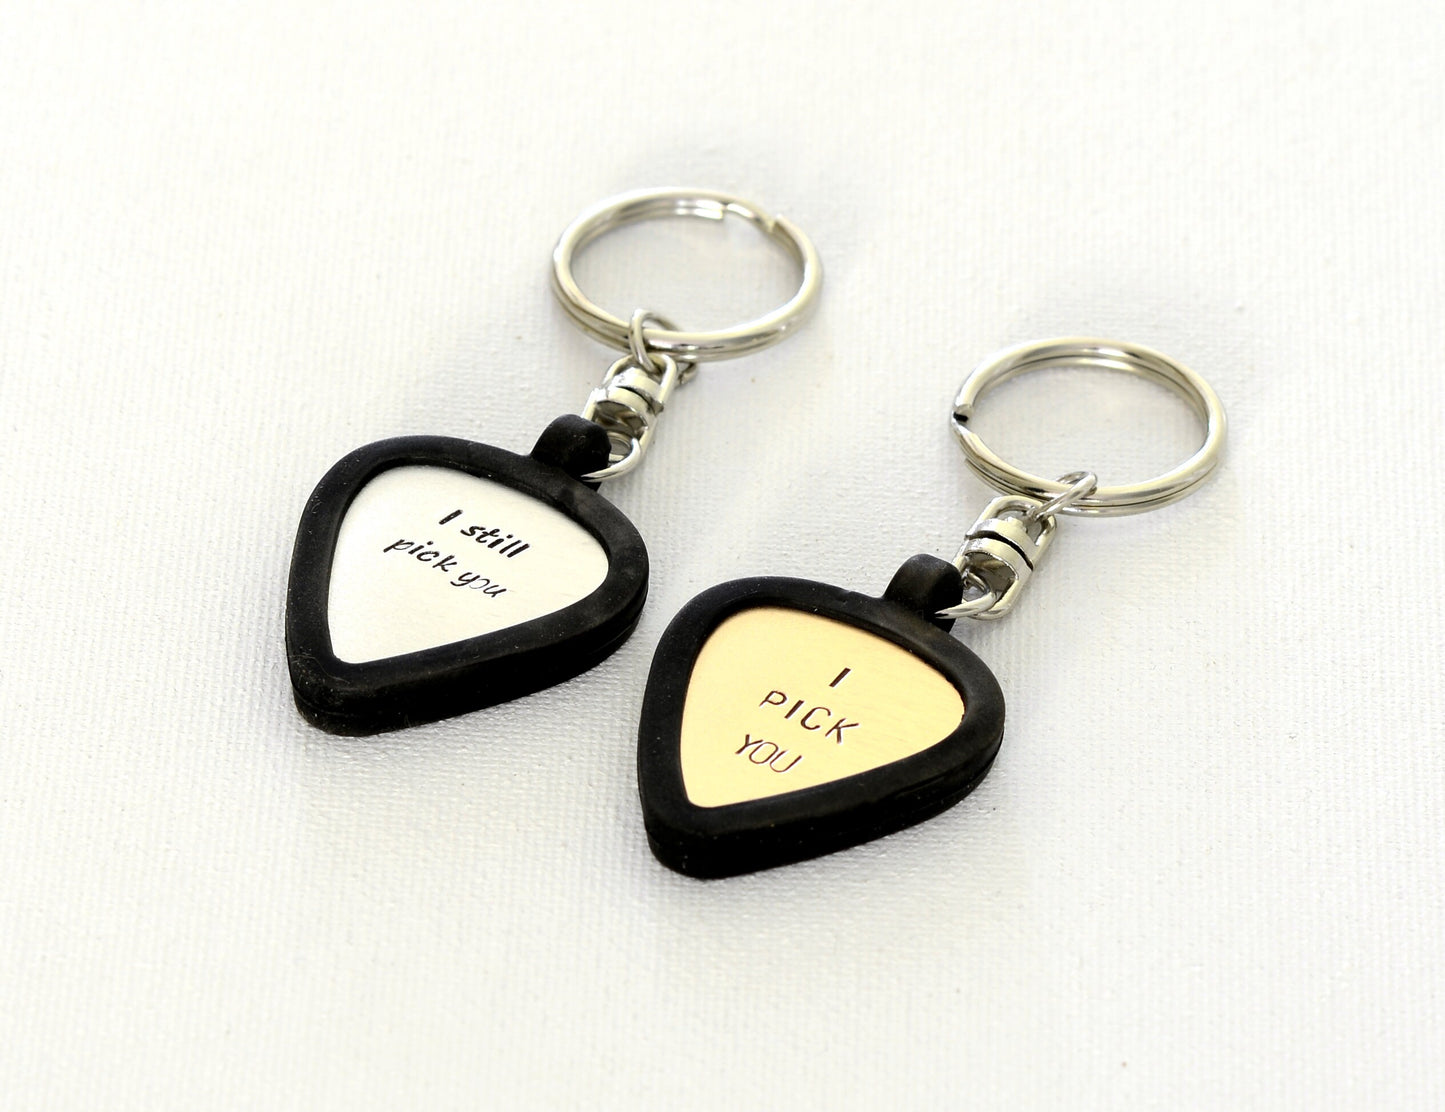 Personalized I still pick you guitar pick keychains for couples